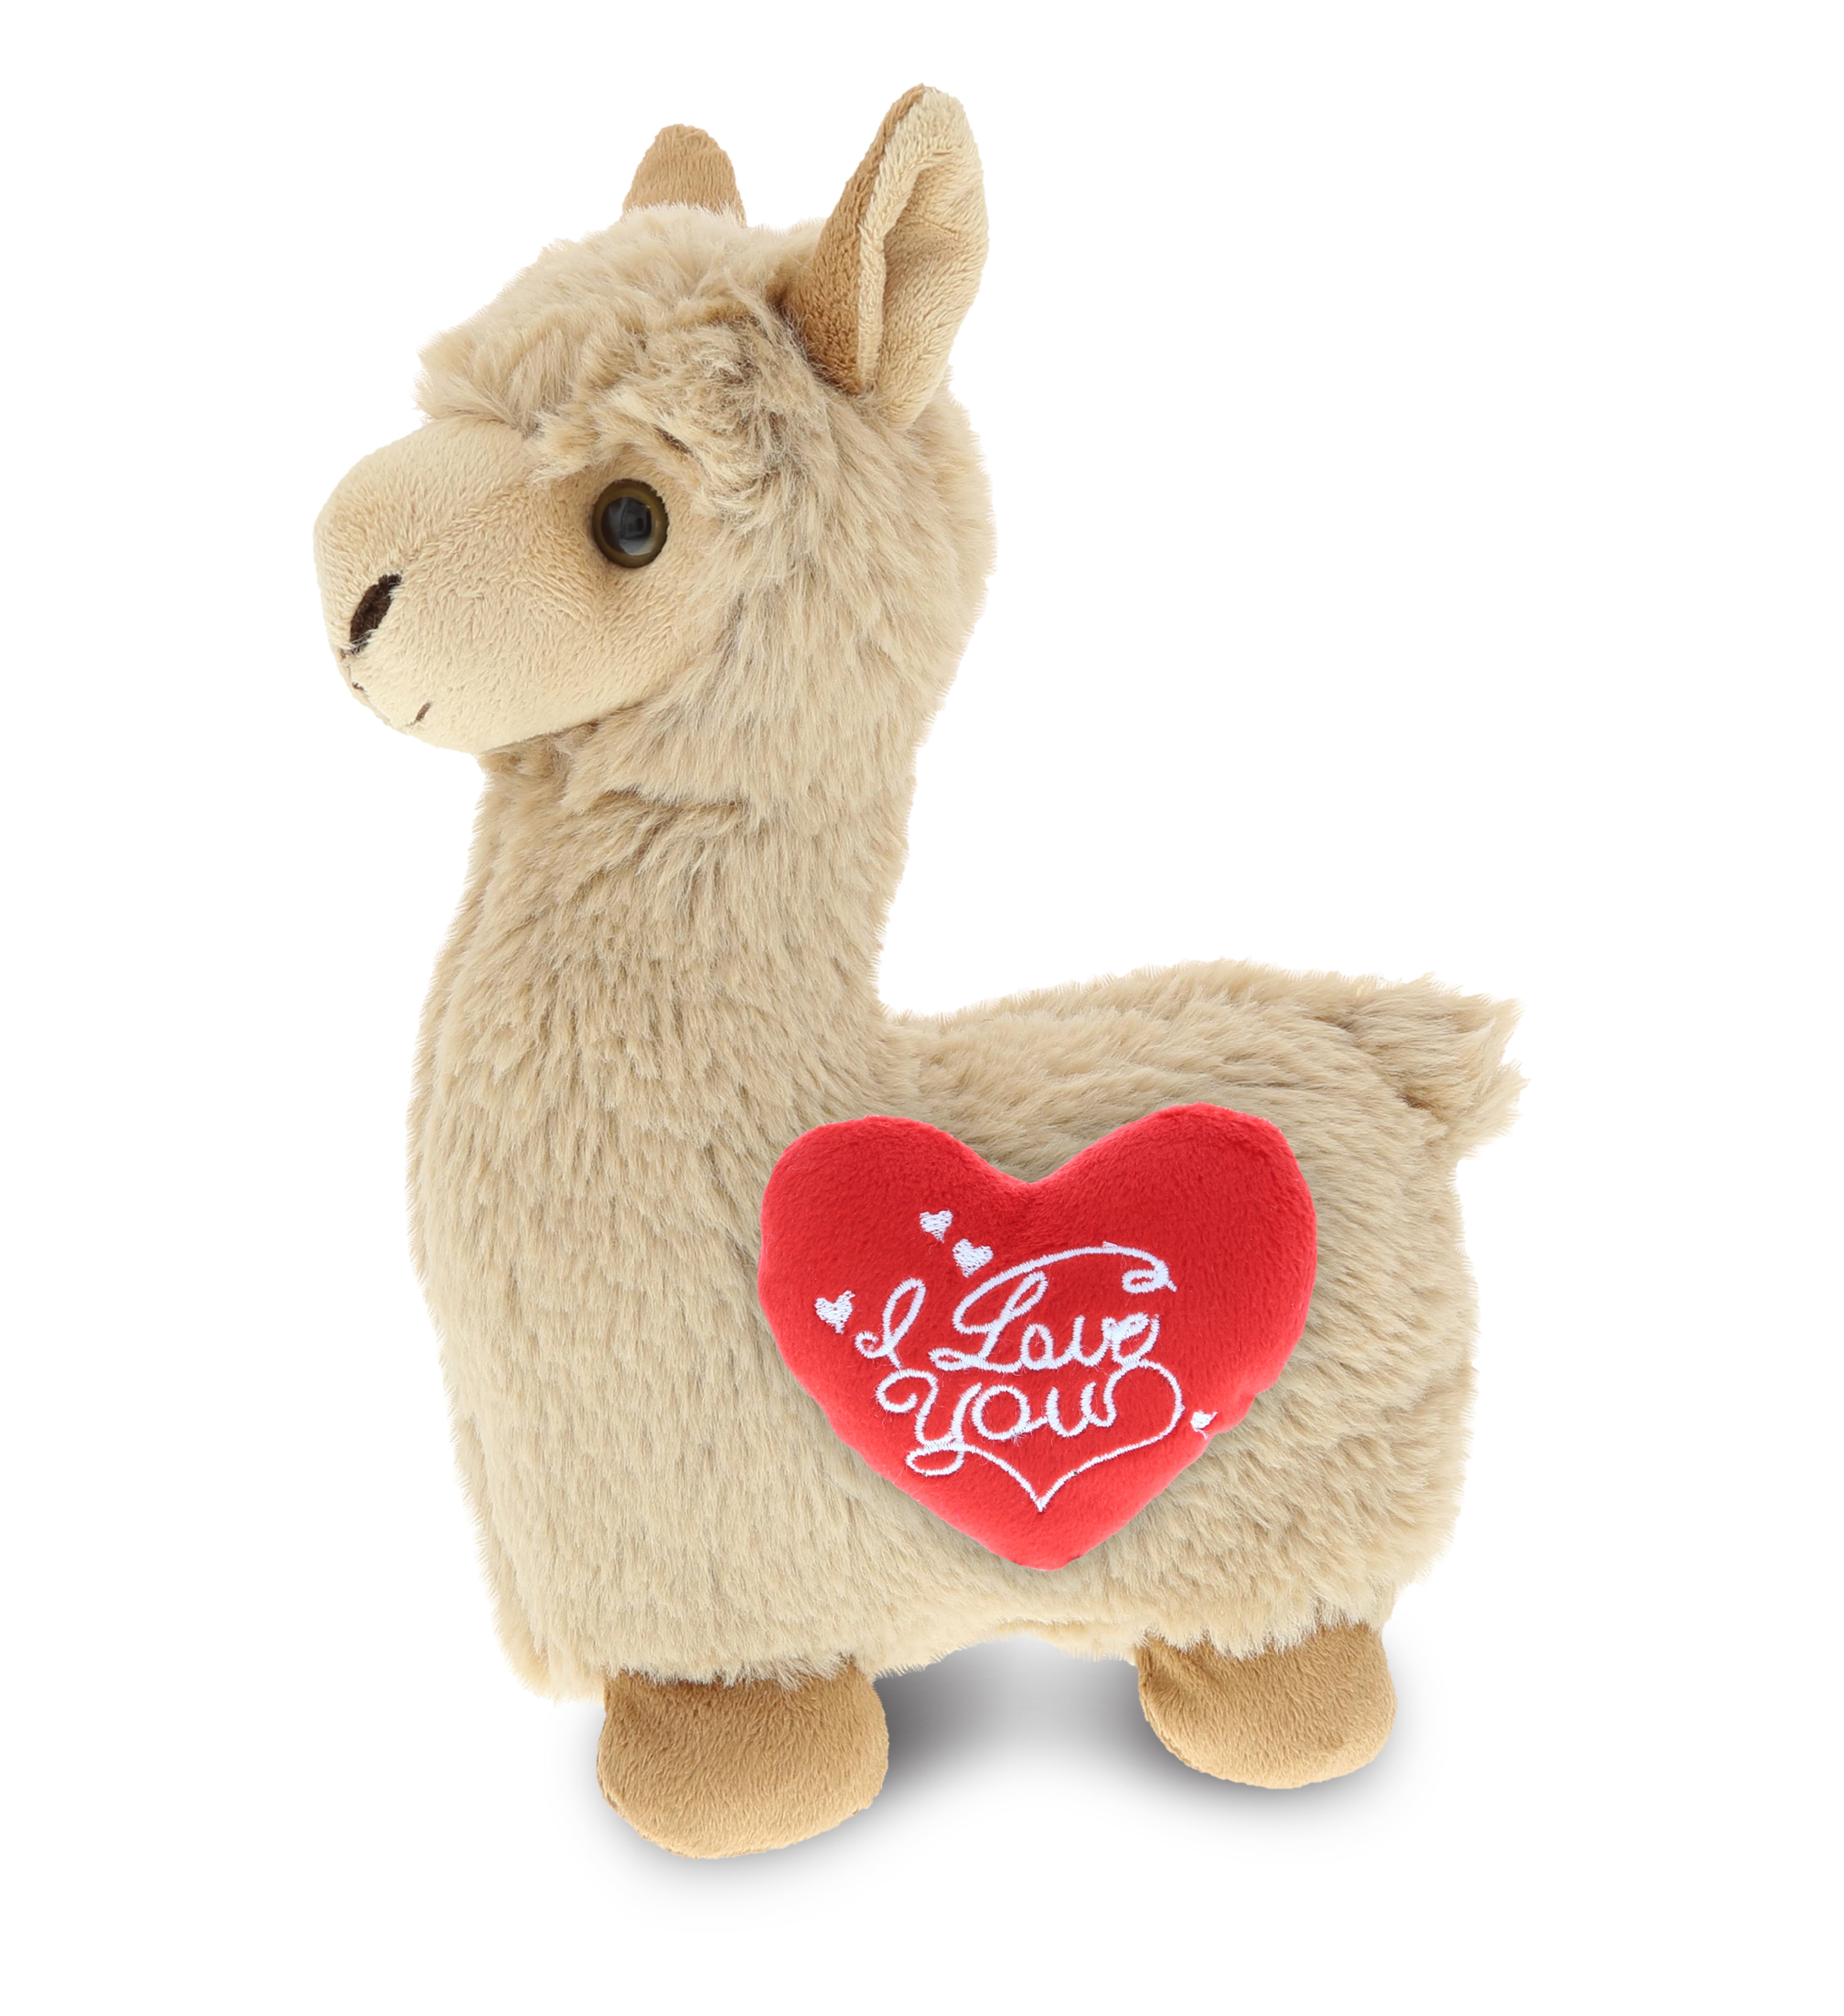 DolliBu Beige Llama I Love You Stuffed Animal 11 Inch, Valentines Day Gifts For or Girlfriend, Cute Teddy Bear with Plush for Friend, Romantic Anniversary or Valentine Gift -